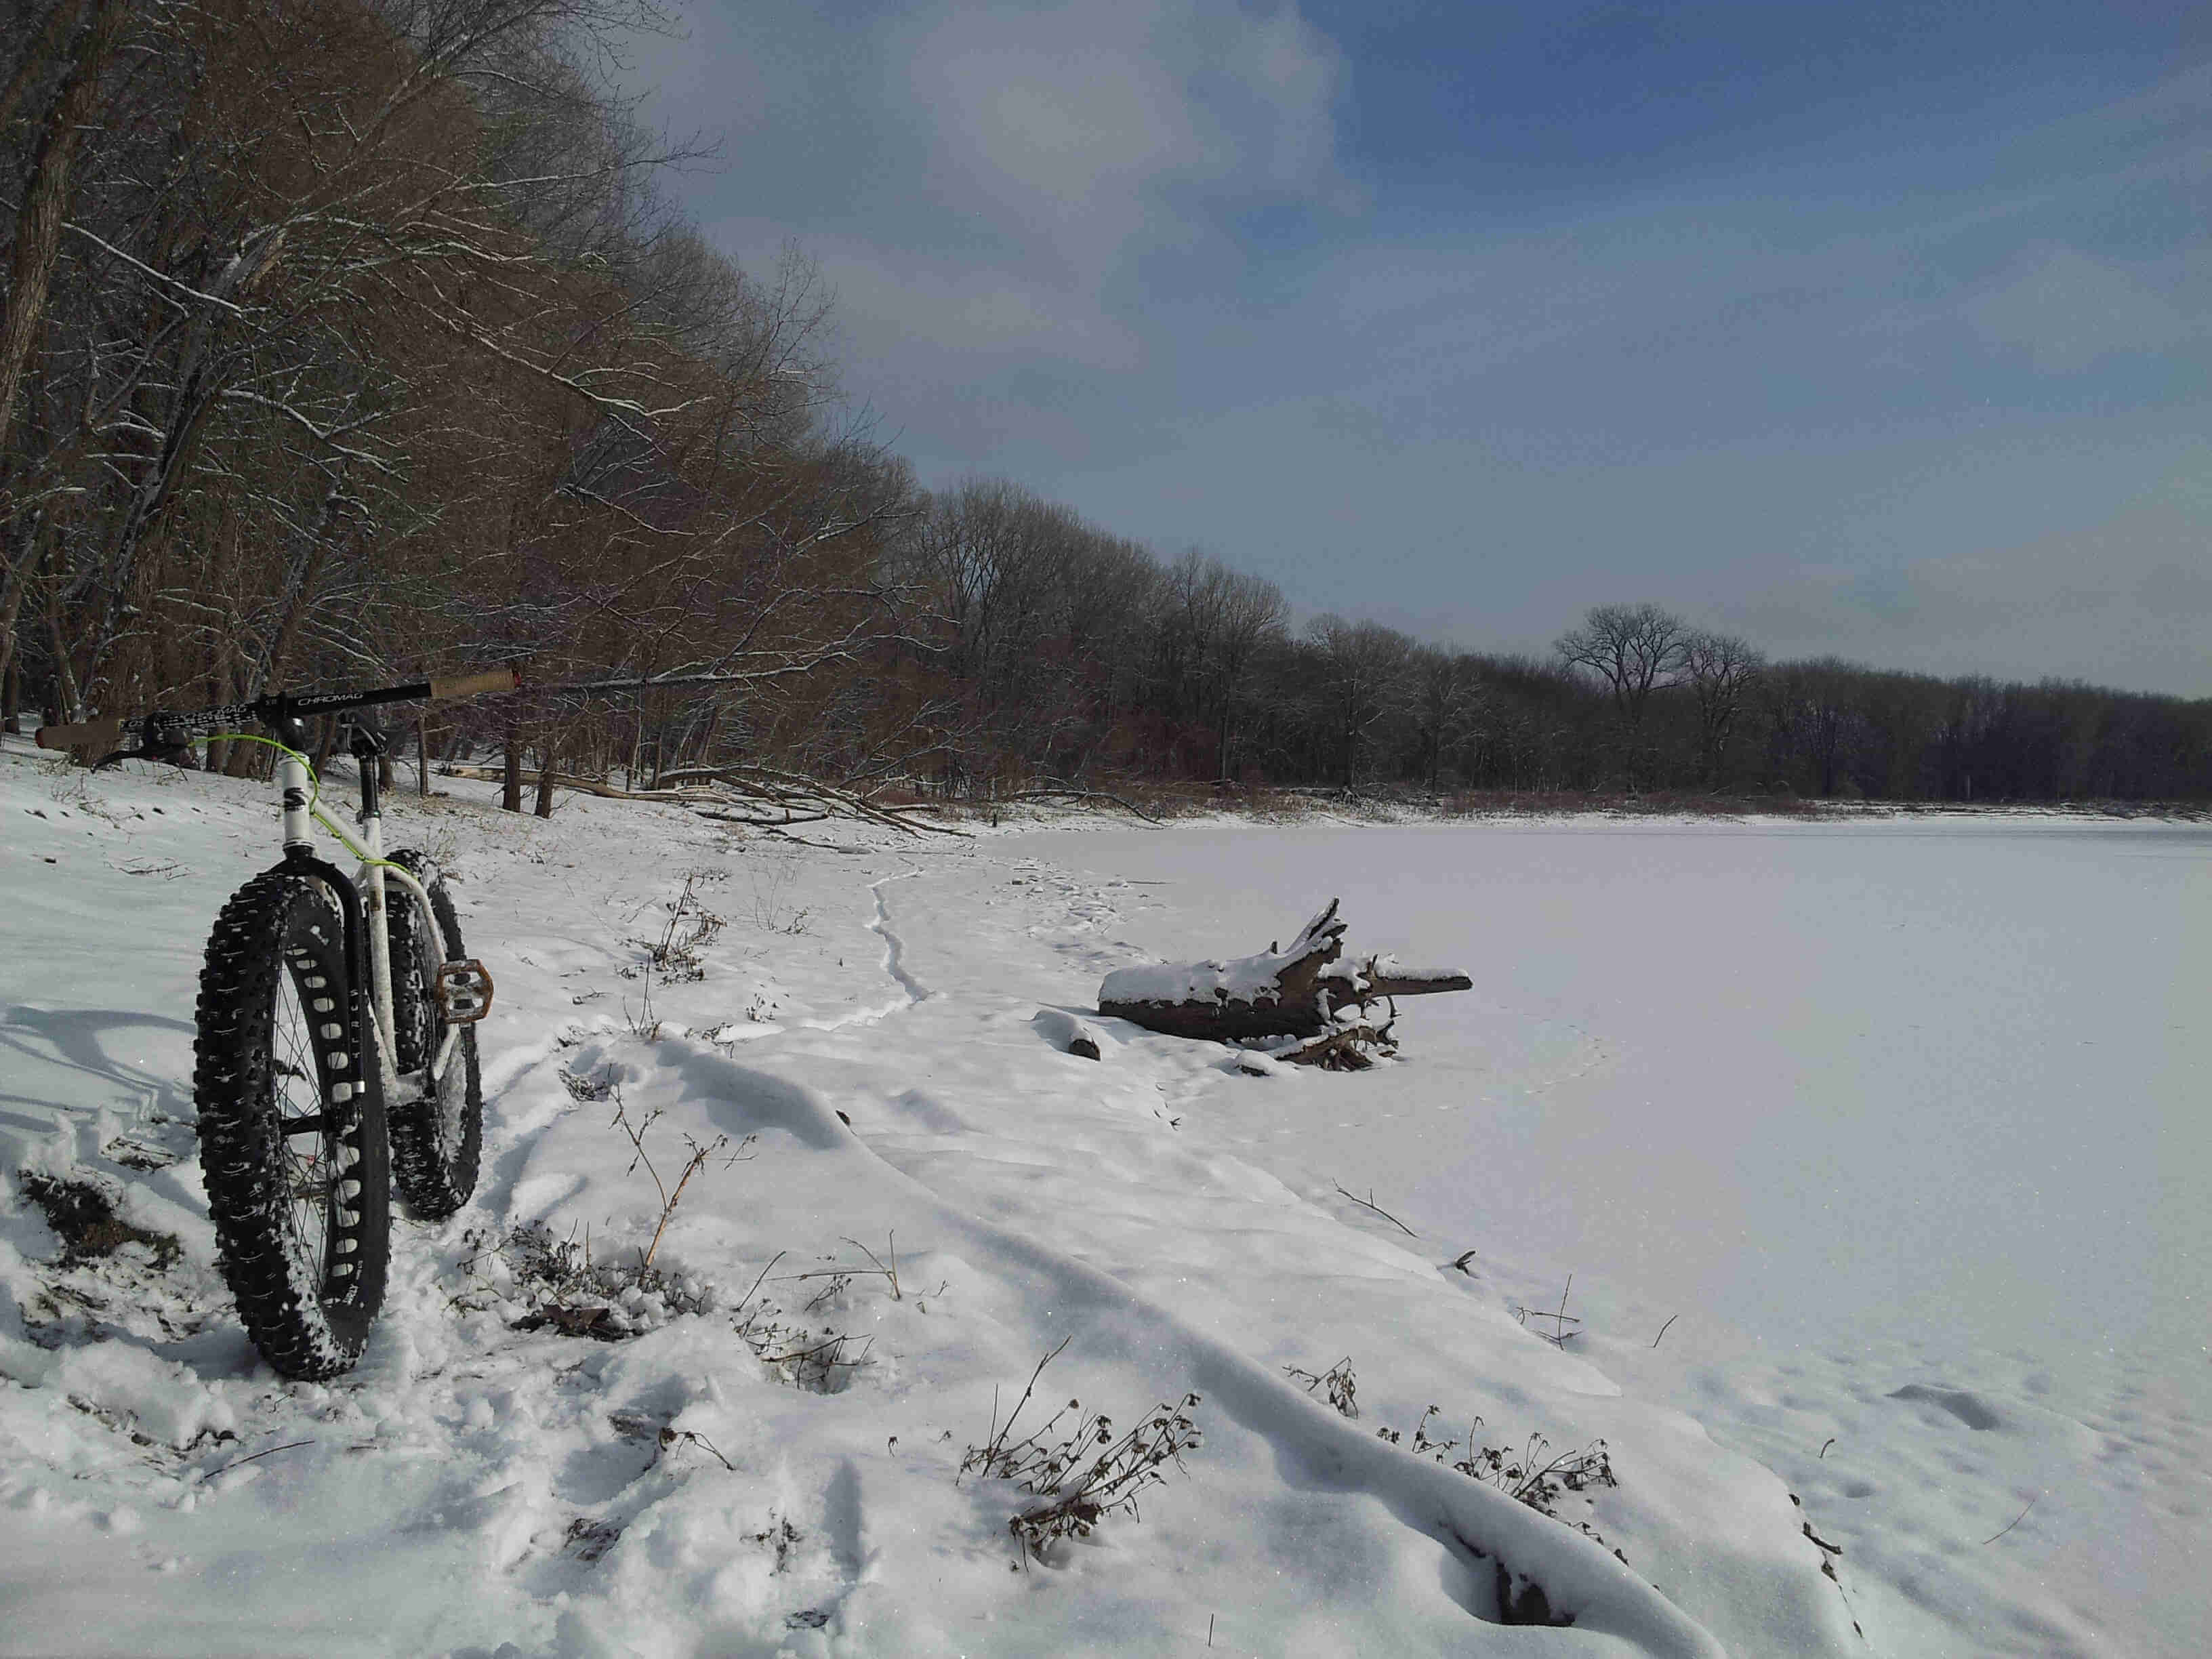 Front view of a white Surly Pugsley bike, on a snowy covered trail, beside a frozen river with bare trees on the sides